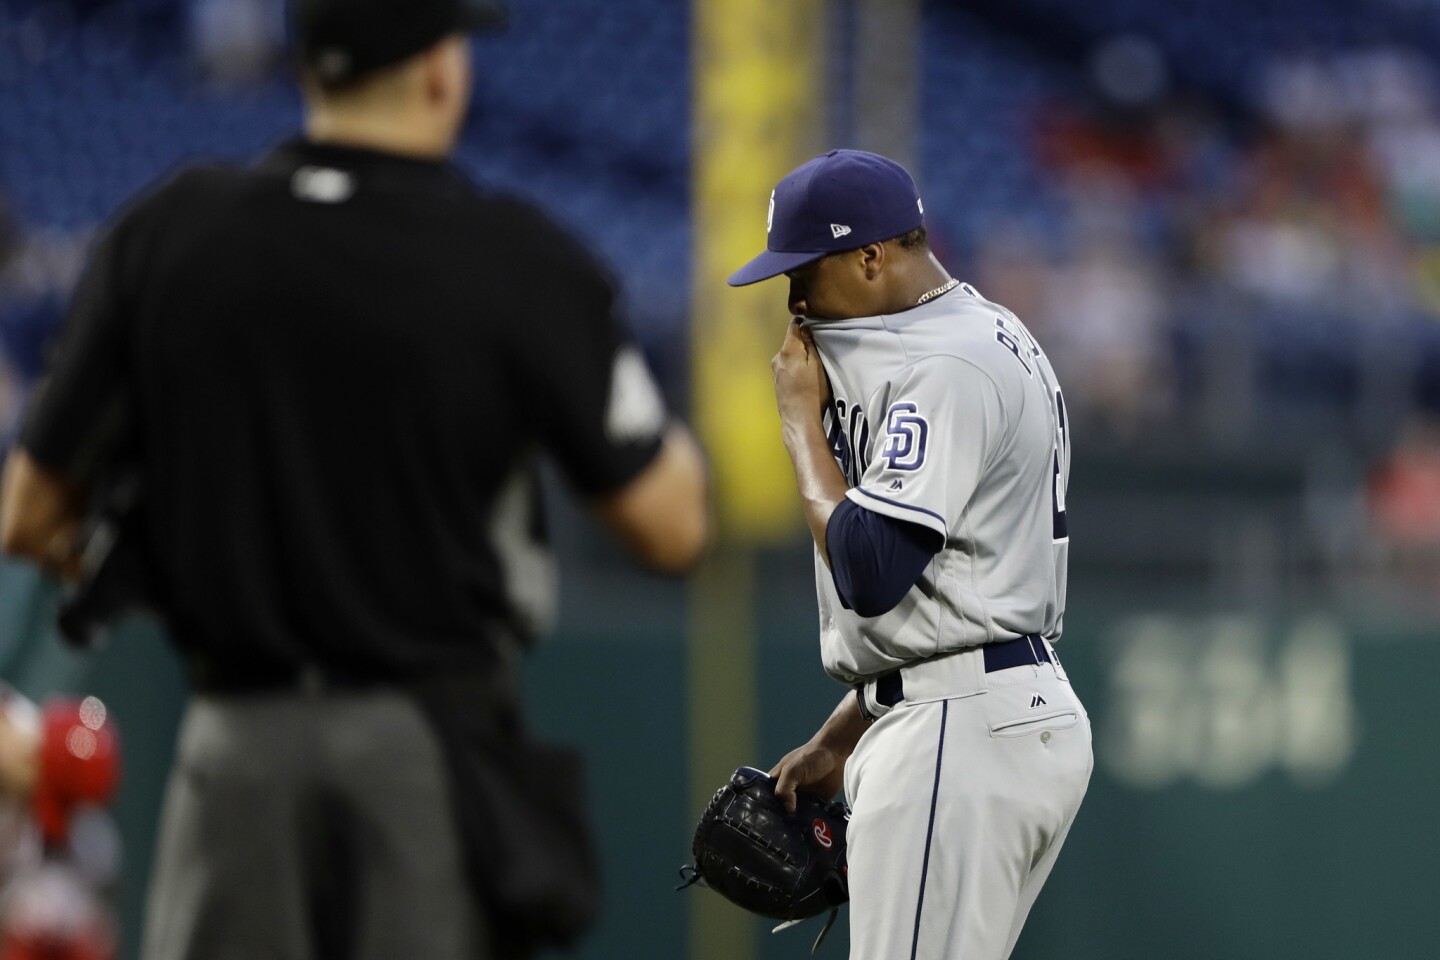 San Diego Padres starting pitcher Luis Perdomo, right, wipes his face as he walks to the dugout after being pulled during the seventh inning of the second baseball game of a doubleheader against the Philadelphia Phillies, Sunday, July 22, 2018, in Philadelphia. (AP Photo/Matt Slocum)